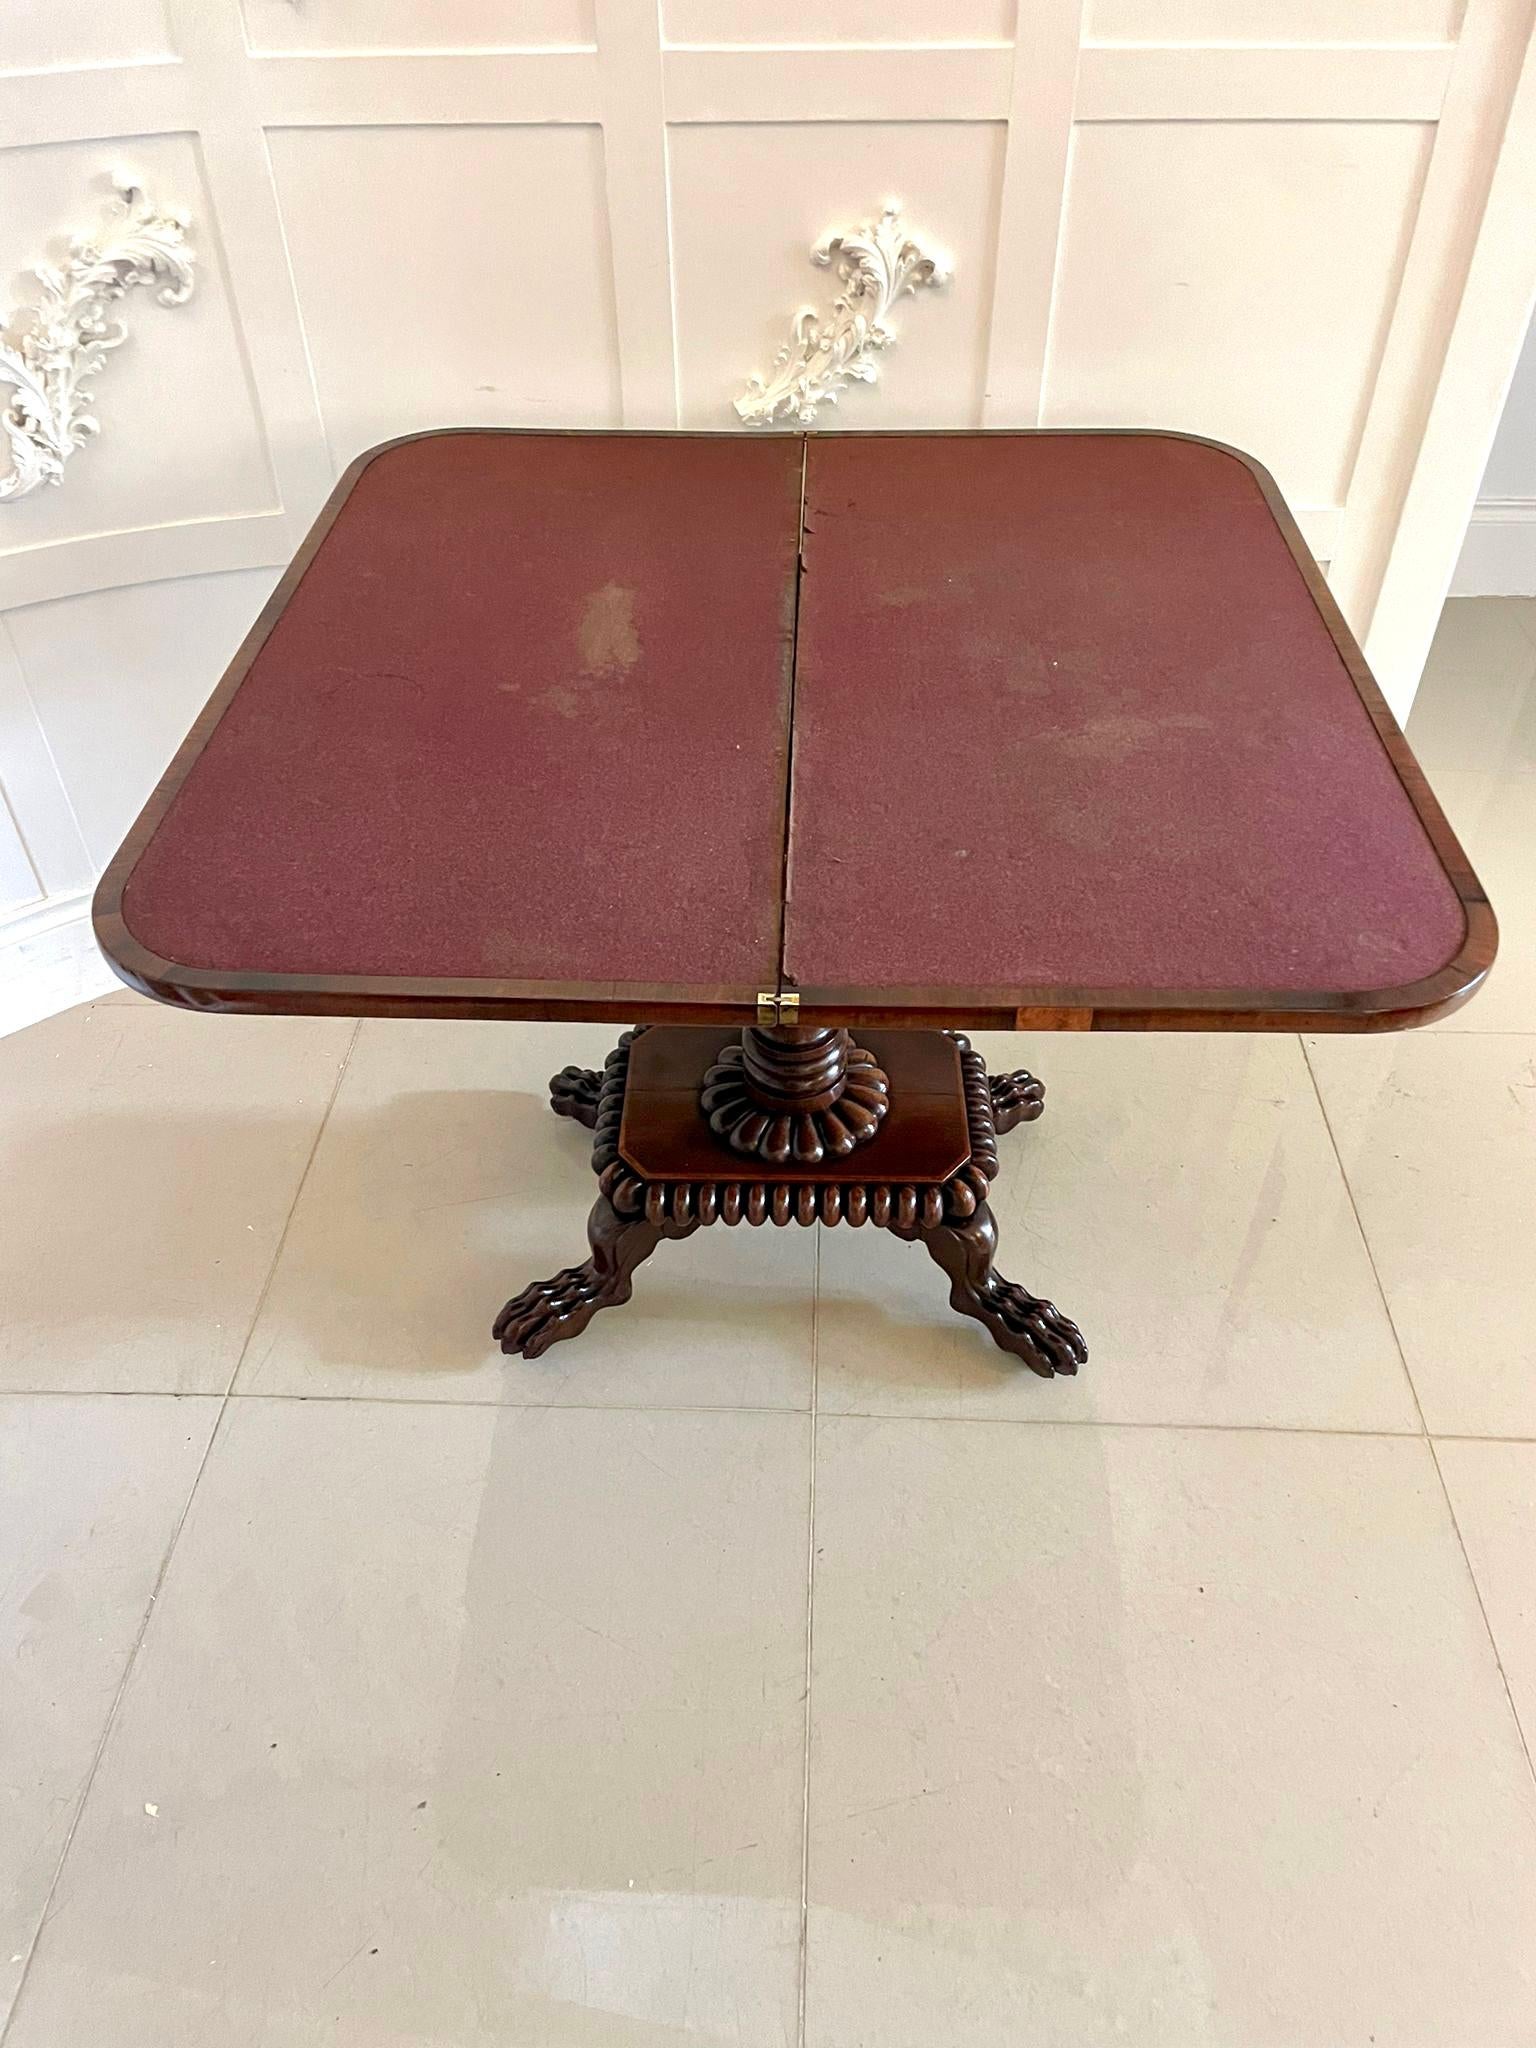 Fine Quality Antique Regency Carved Rosewood Brass Inlaid Card/Side Table In Good Condition For Sale In Suffolk, GB